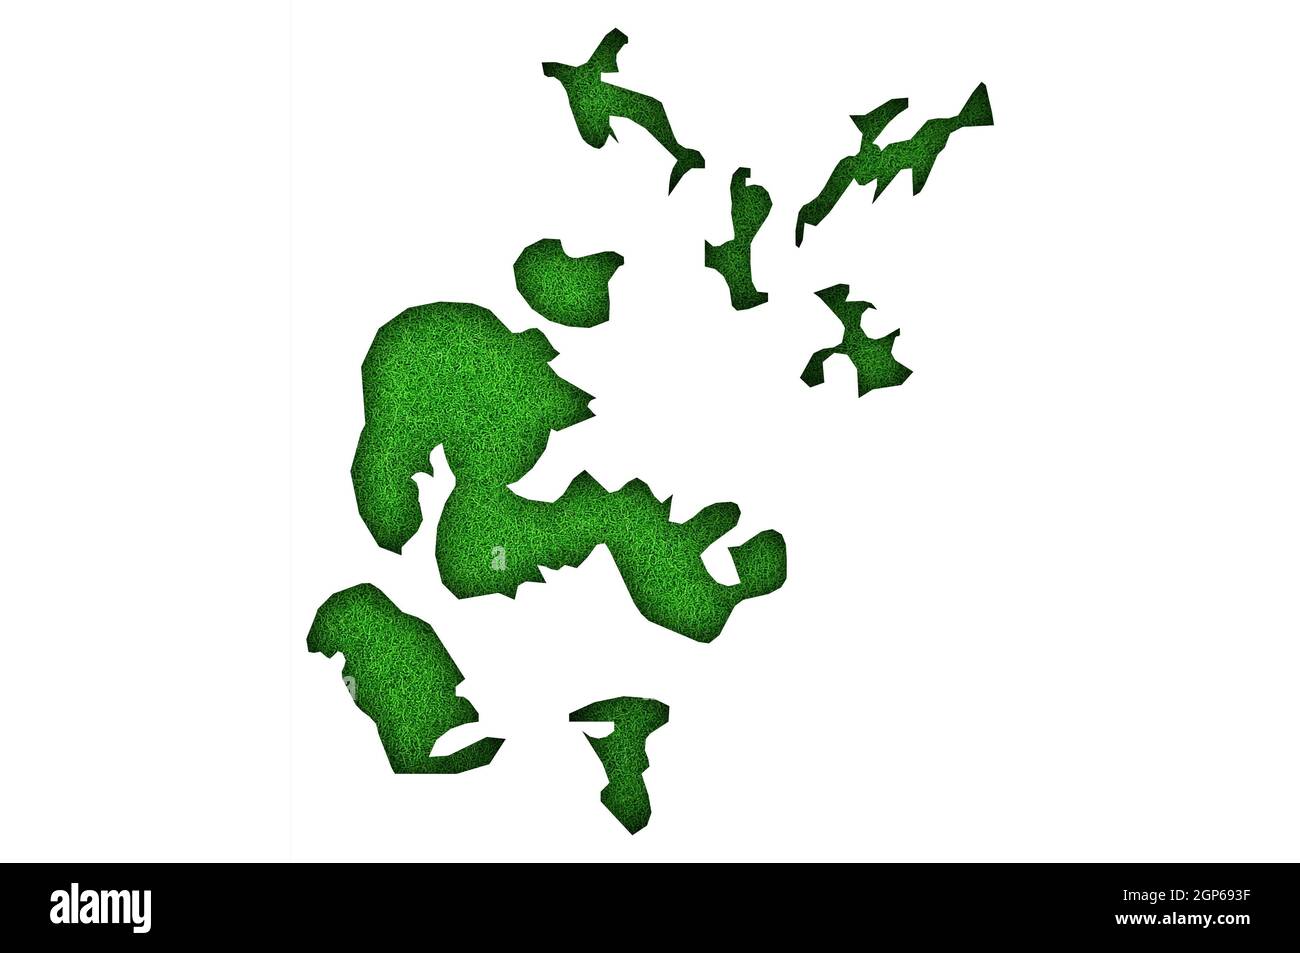 Map of Orkney on green felt Stock Photo